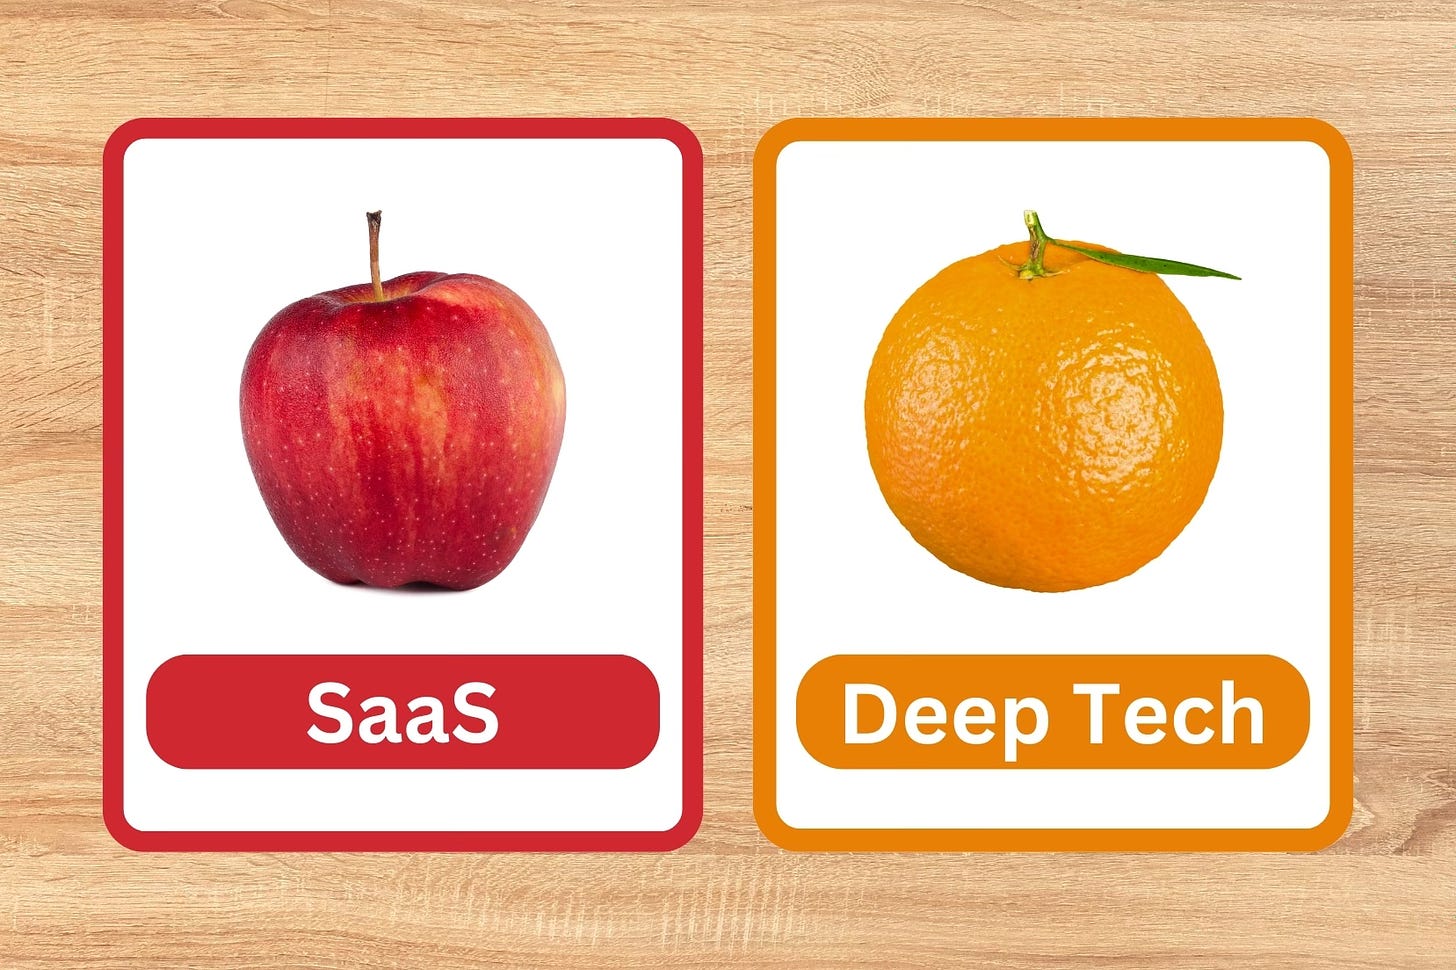 Flashcards with an apple and orange but say "SaaS" and "Deep Tech"